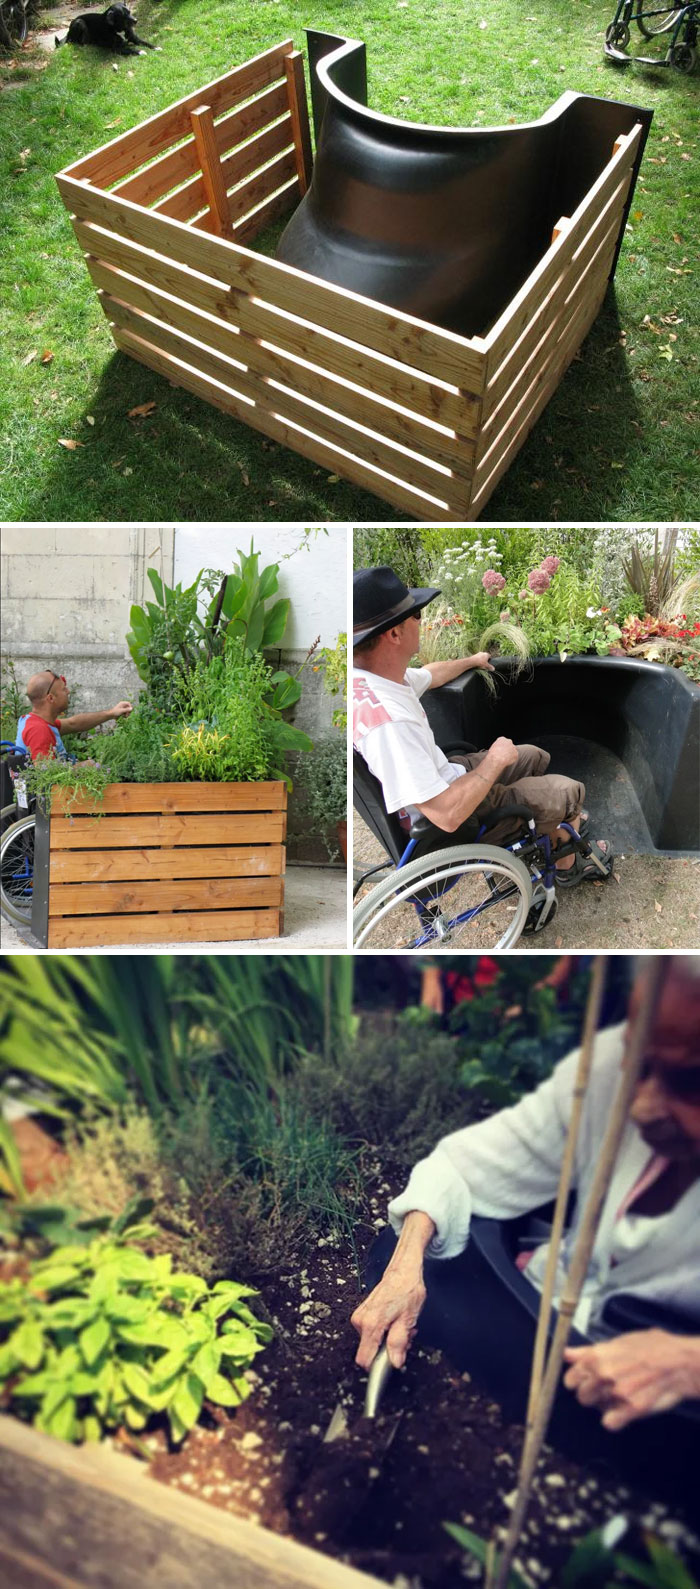 Wheelchair Accessible Gardening. Used For Garden Therapy, Rehab, Hospice. Developed In Douvres-La-Délivrande, France